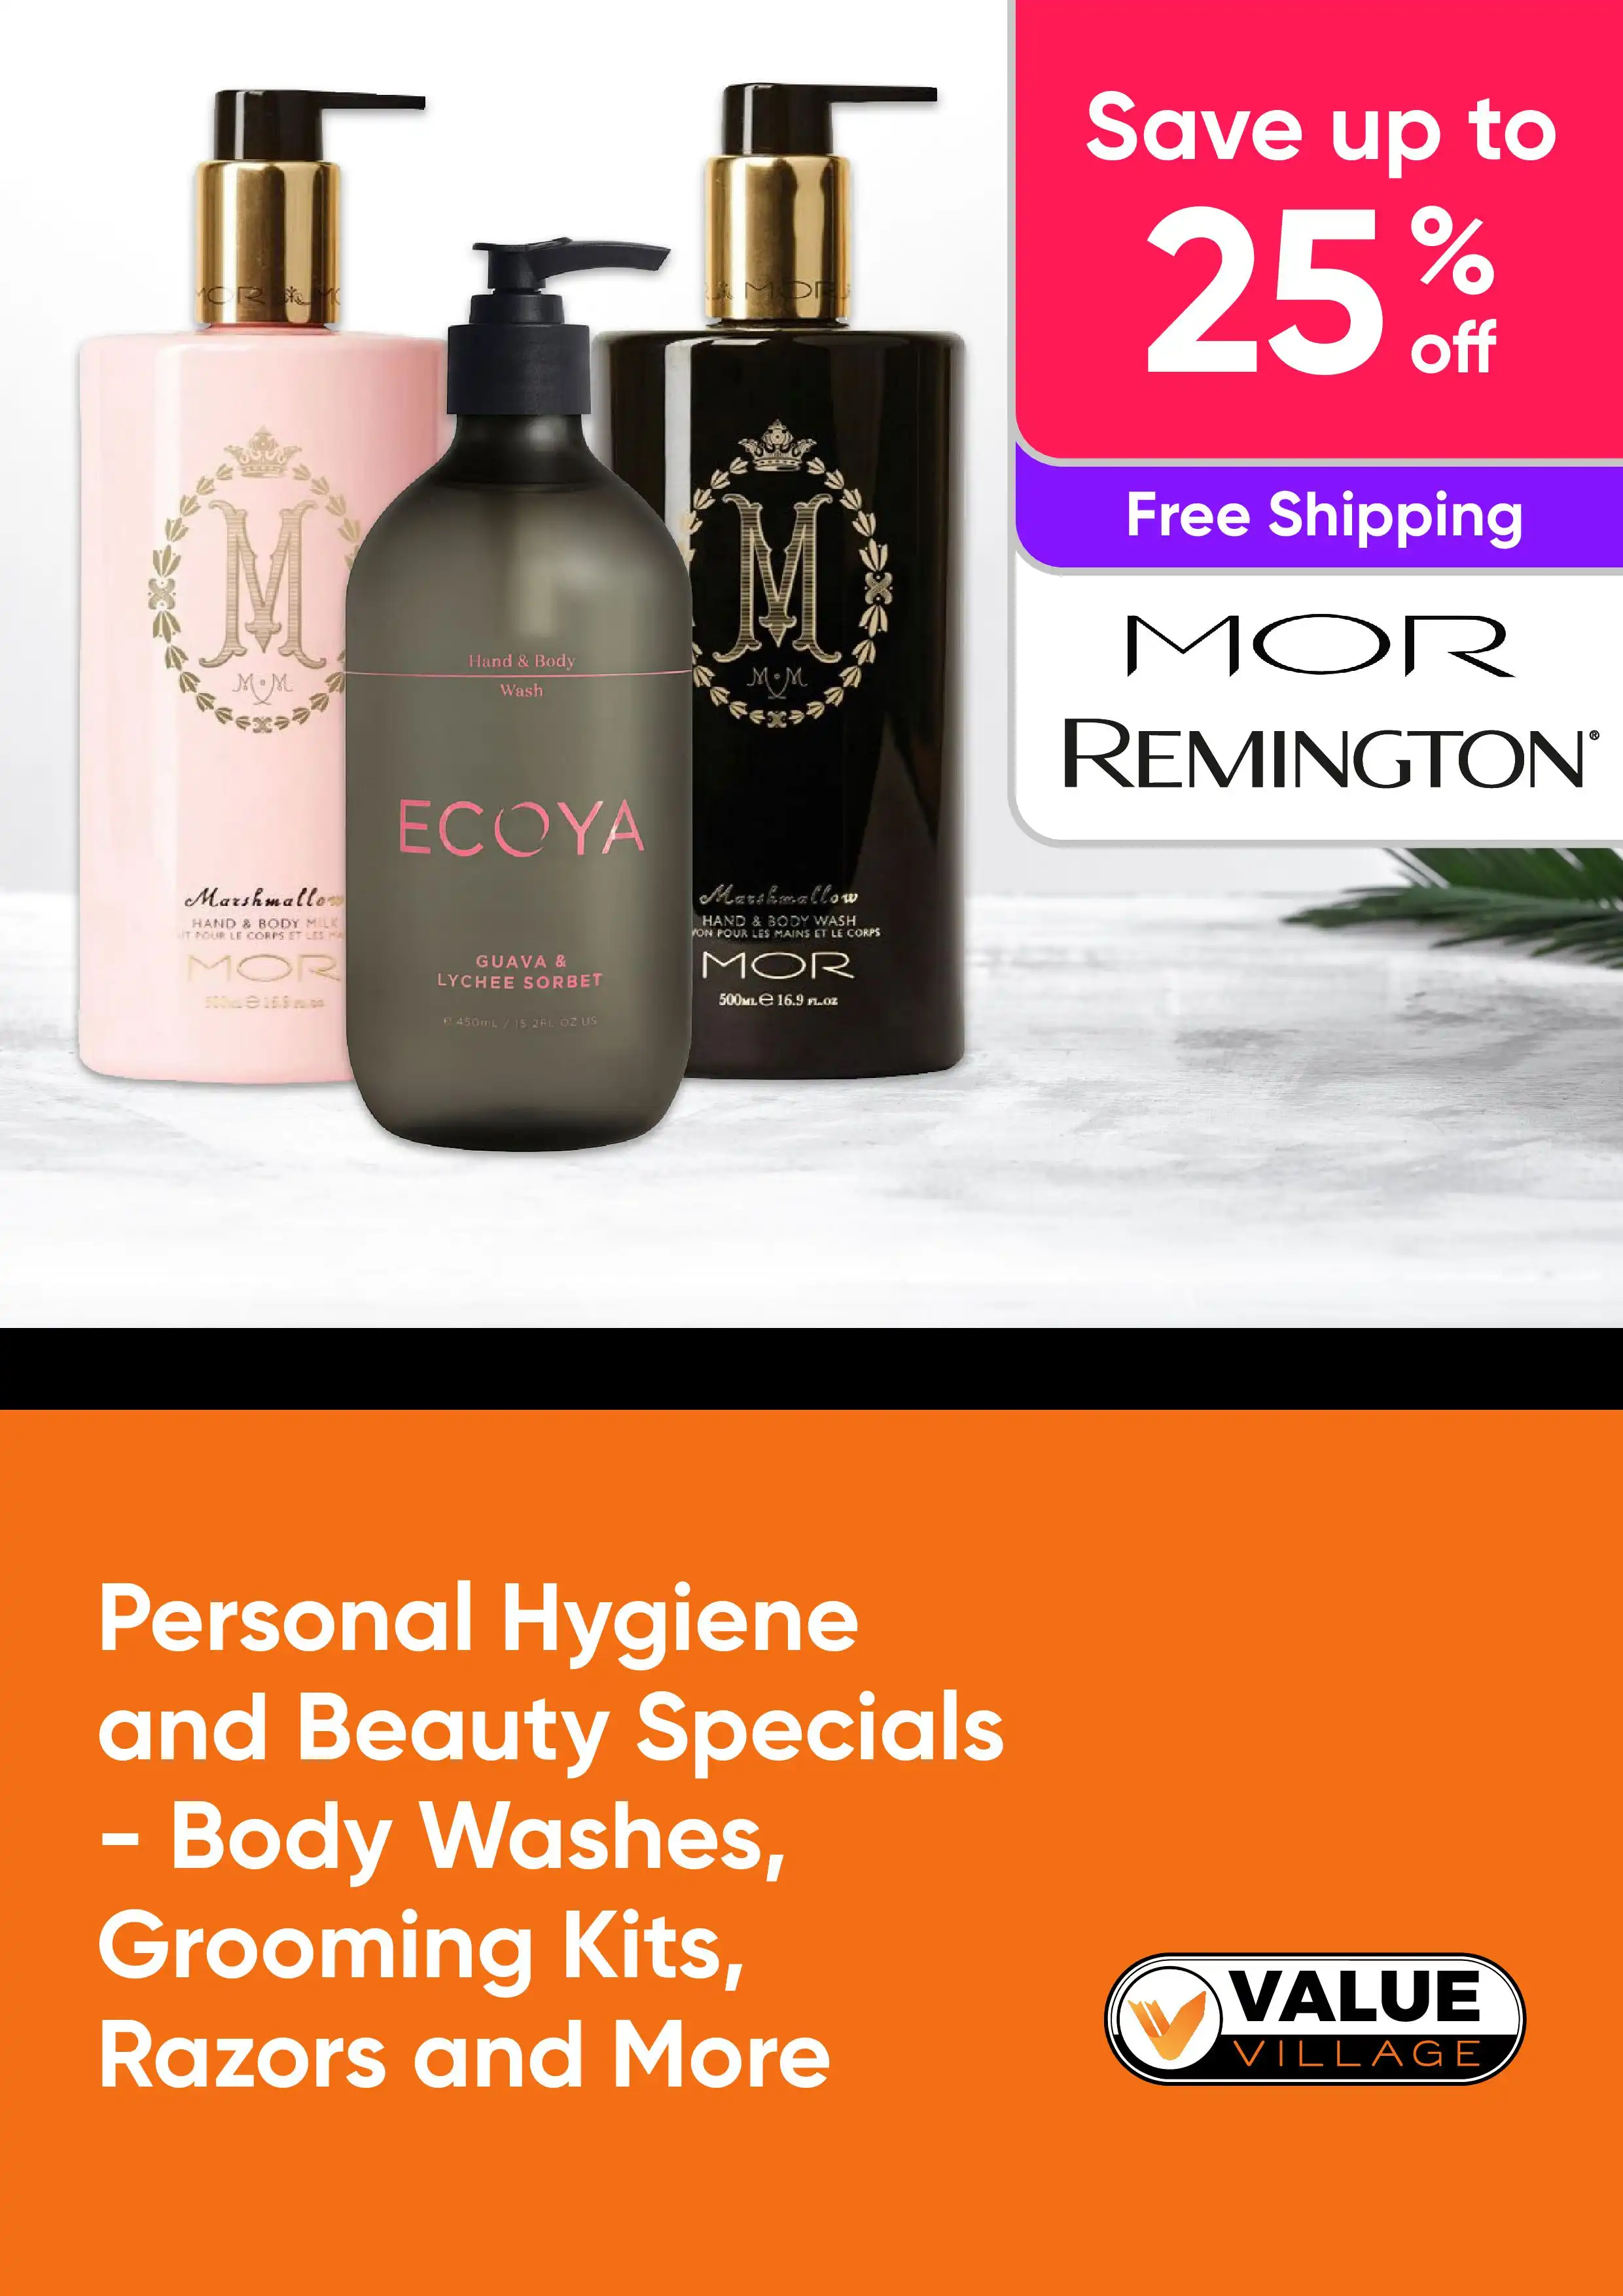 Personal Hygiene and Beauty Specials - Body Washes, Grooming Kits, Razors and More - Mor, Remington - Up to 25% Off